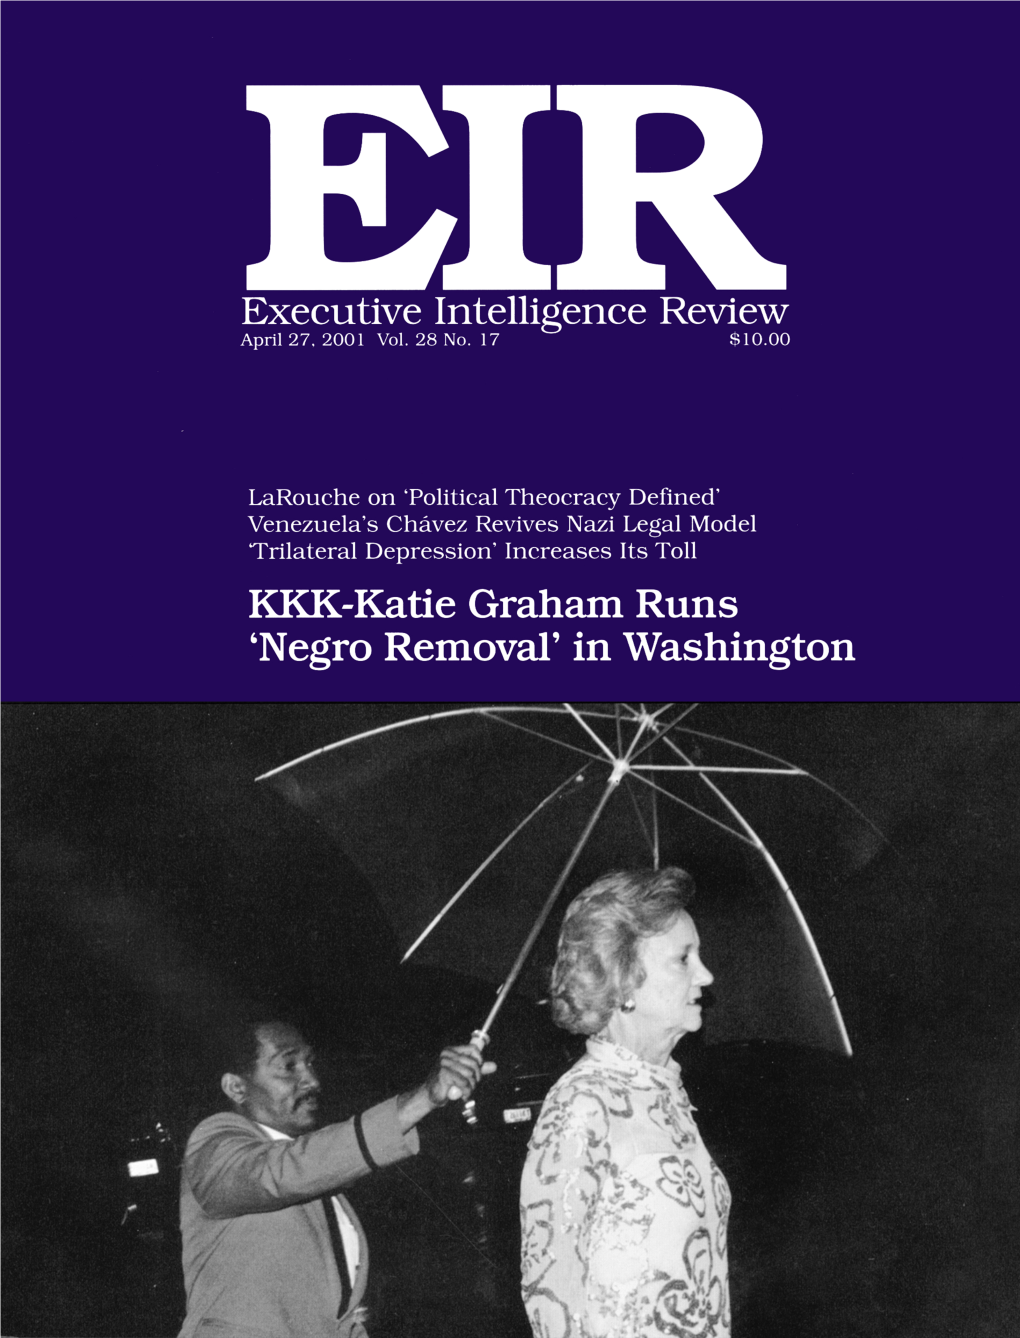 Executive Intelligence Review, Volume 28, Number 17, April 27